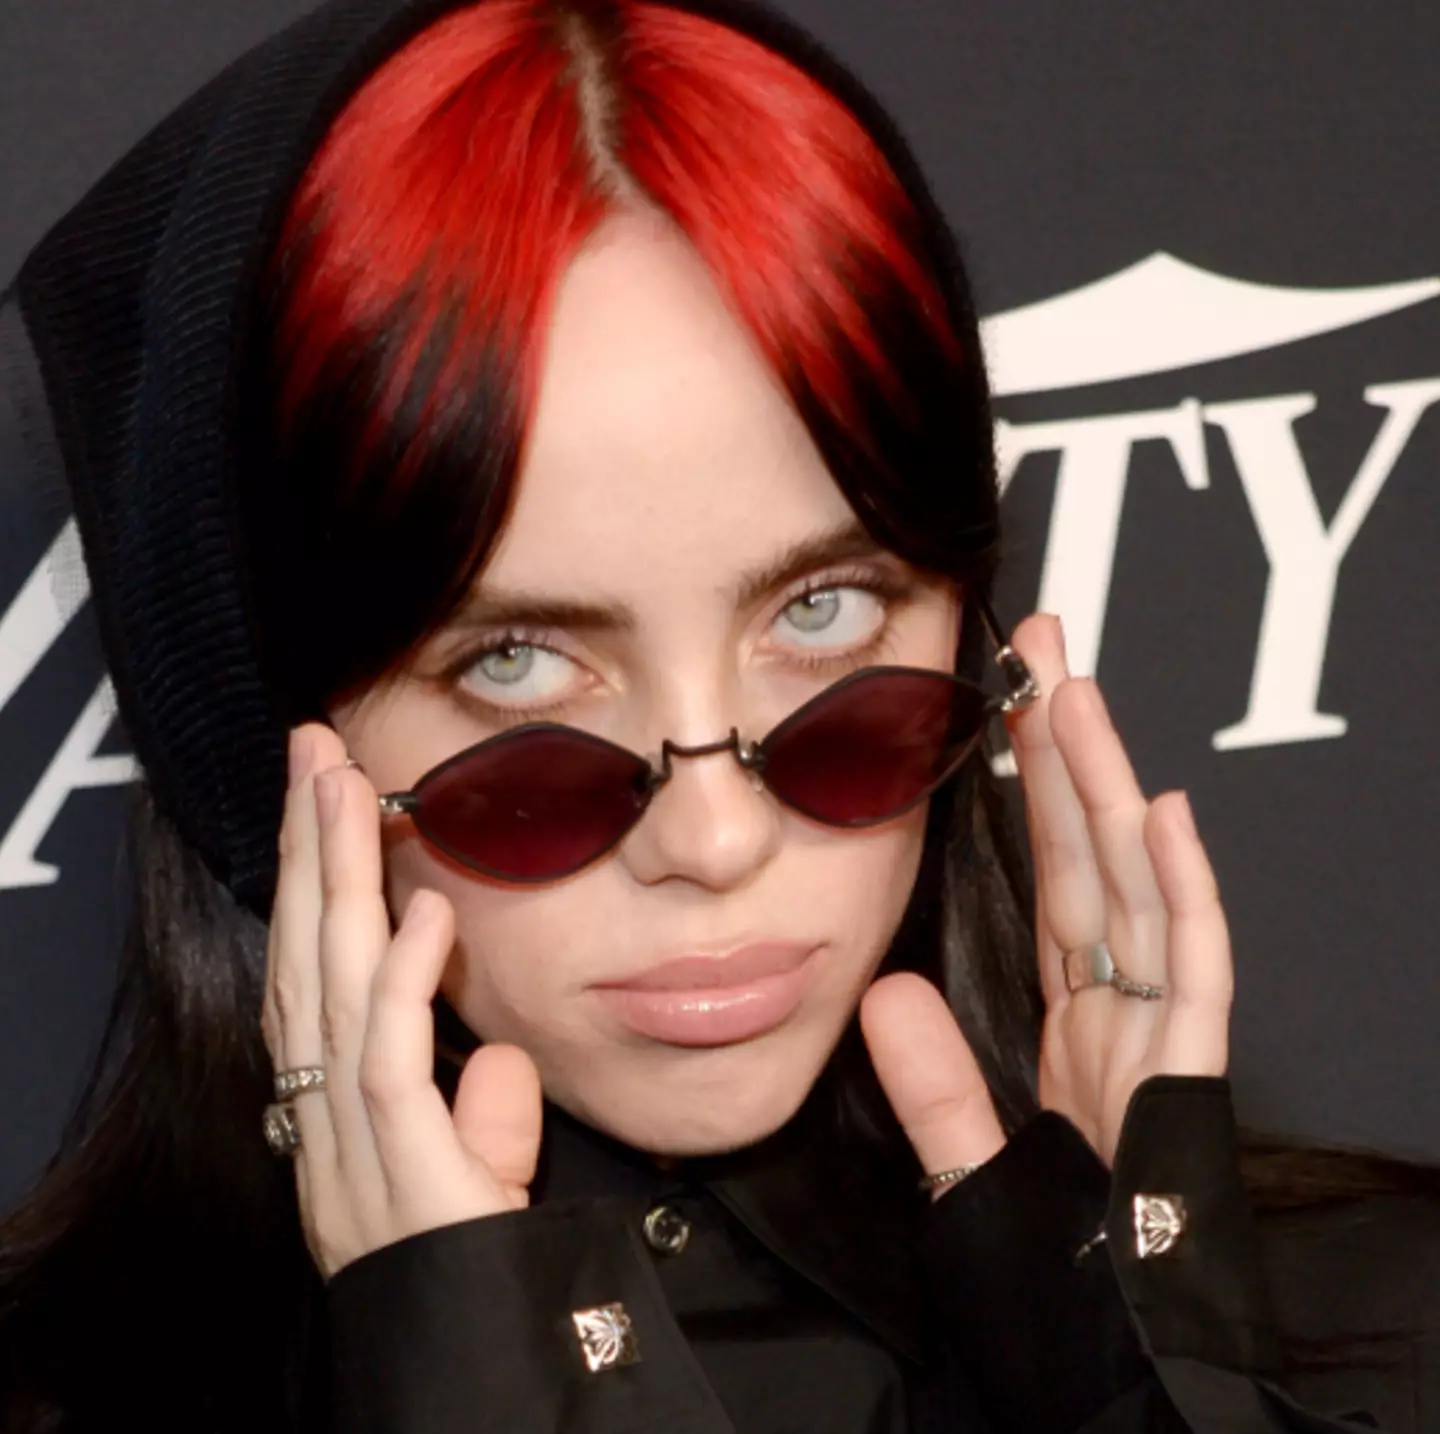 Billie Eilish said she was 'attracted to' women.